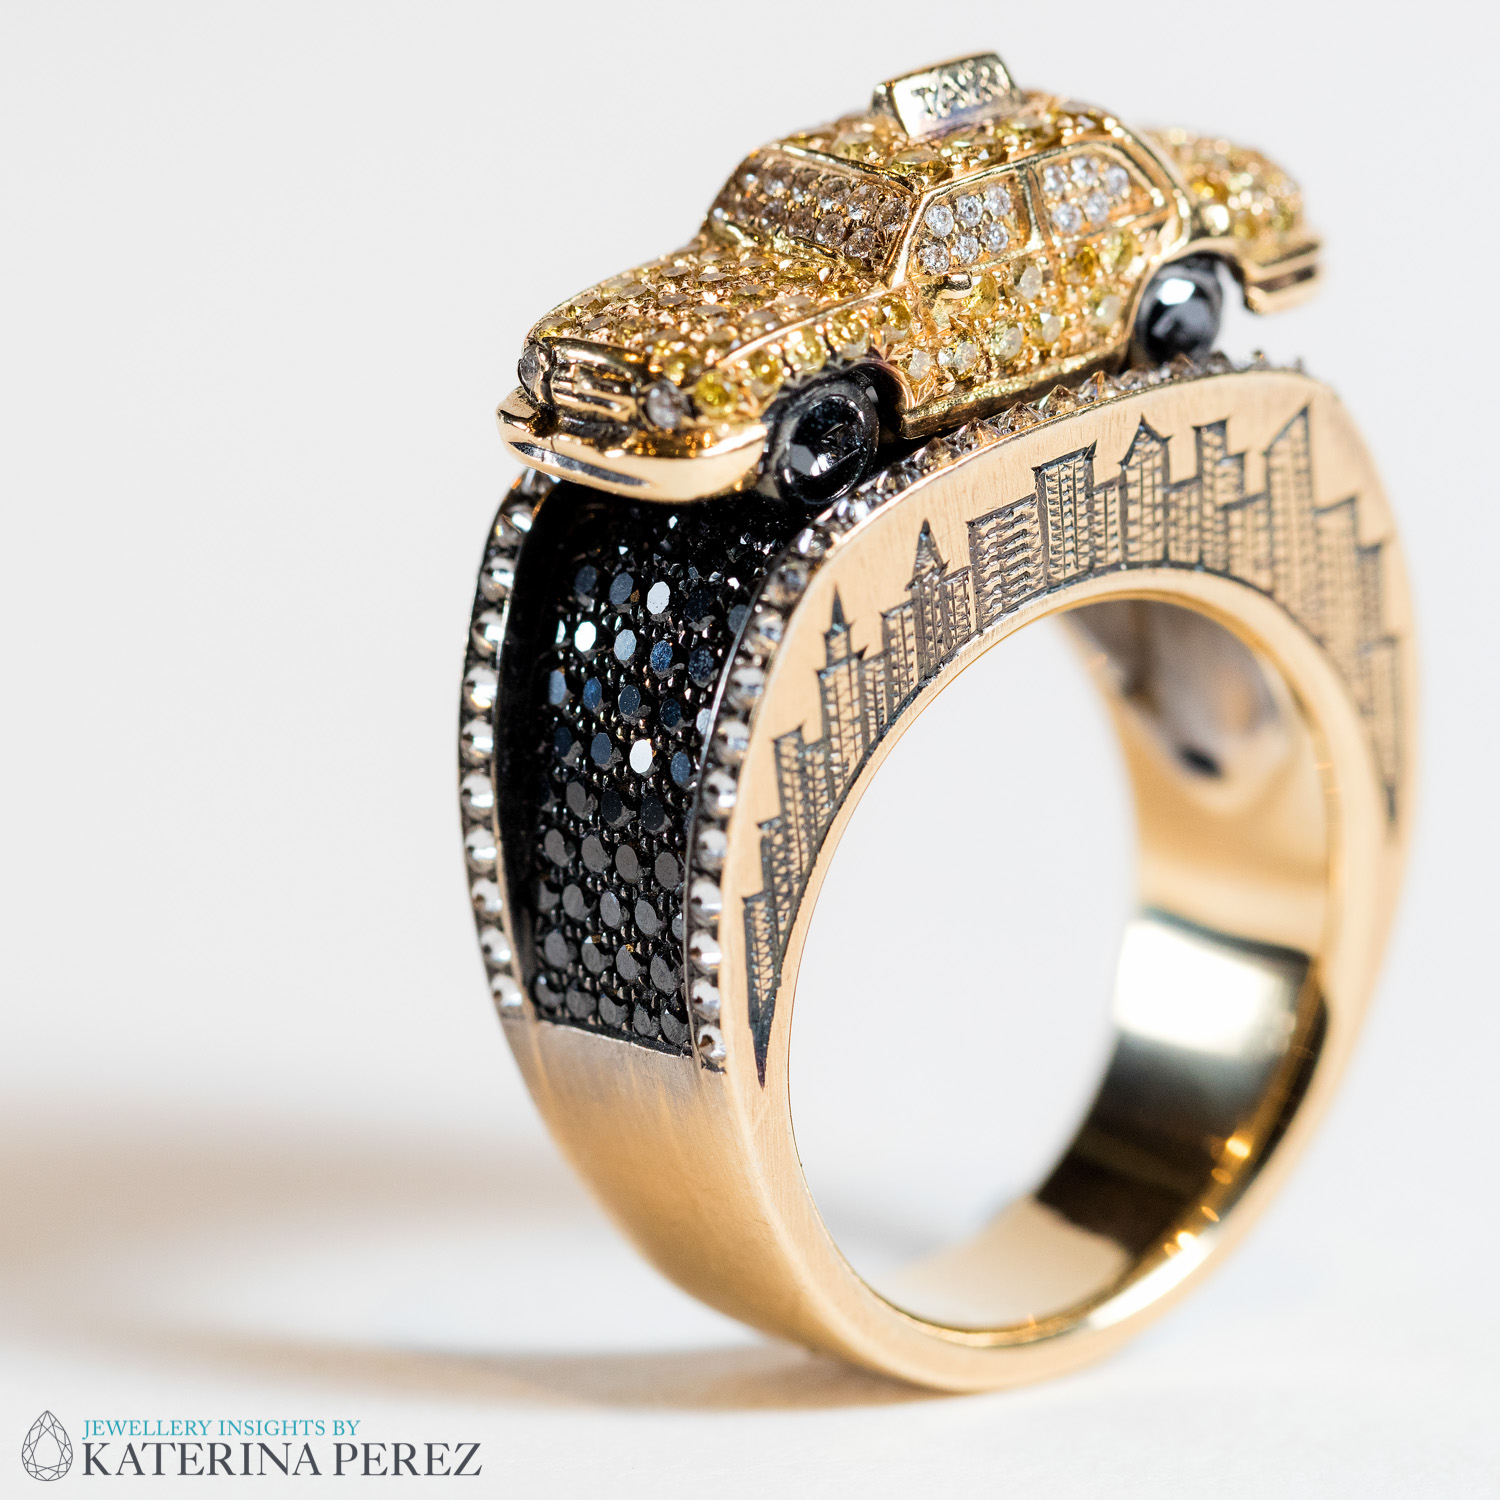 Wendy Brandes New York Taxi ring from the Maneater collection